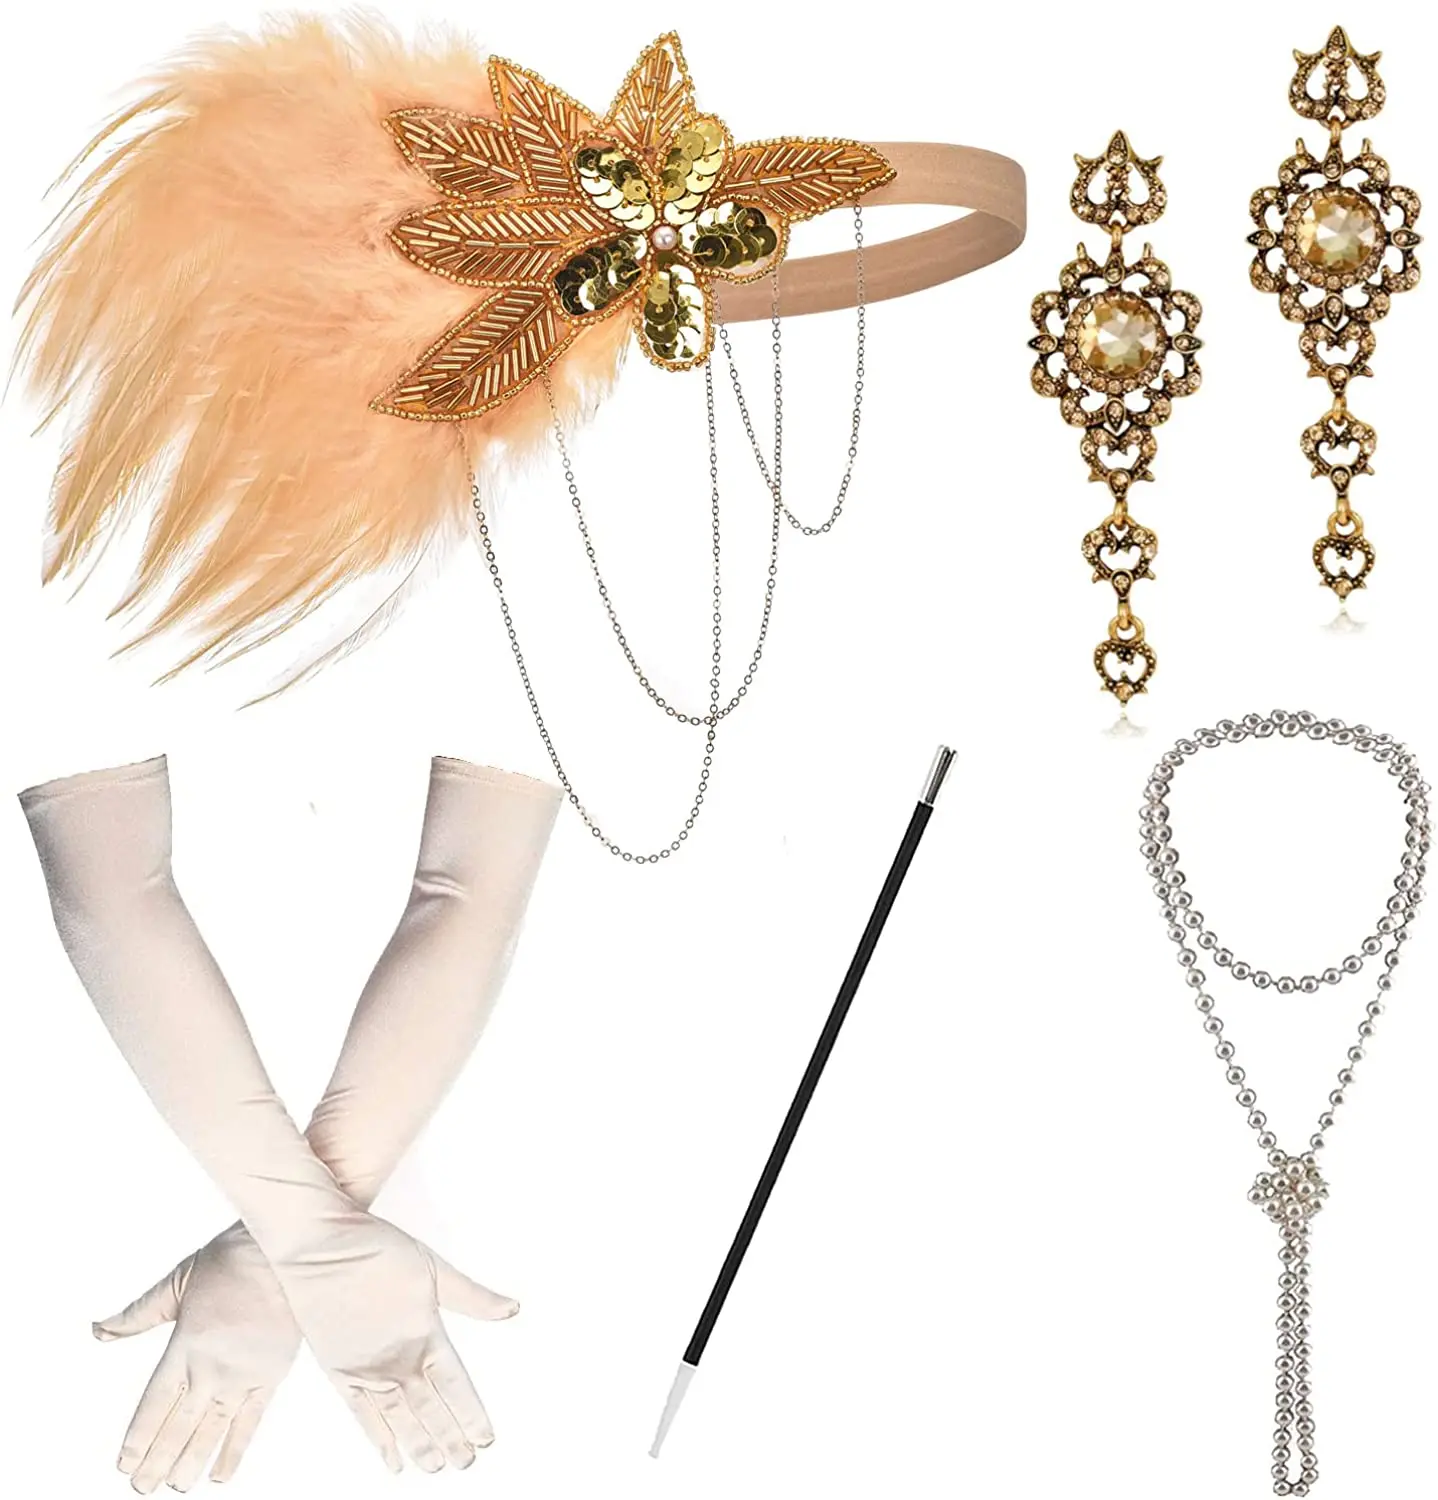 Ecoparty 1920s Great Gatsby Accessories Set For Women Costume Flapper  Headpiece Headband - Buy Ecoparty 1920s Great Gatsby Accessories Set For  Women Costume Flapper Headpiece Headband Product on